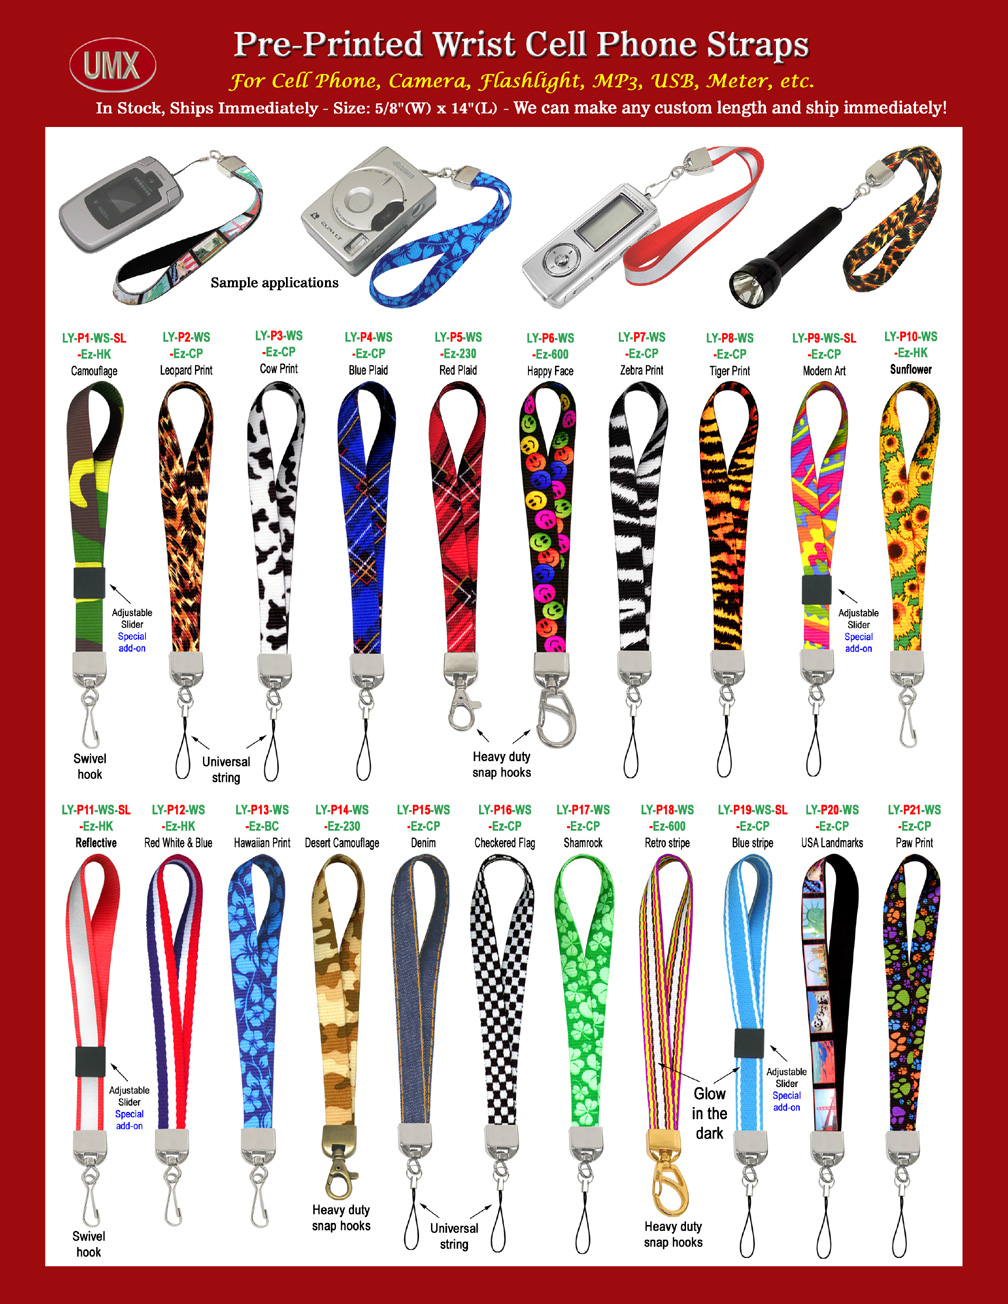 Cool Designed Pre-Printed Cell Phone Wrist Straps: For Cellular Phone,  Camera or MP3 Wrist Wear